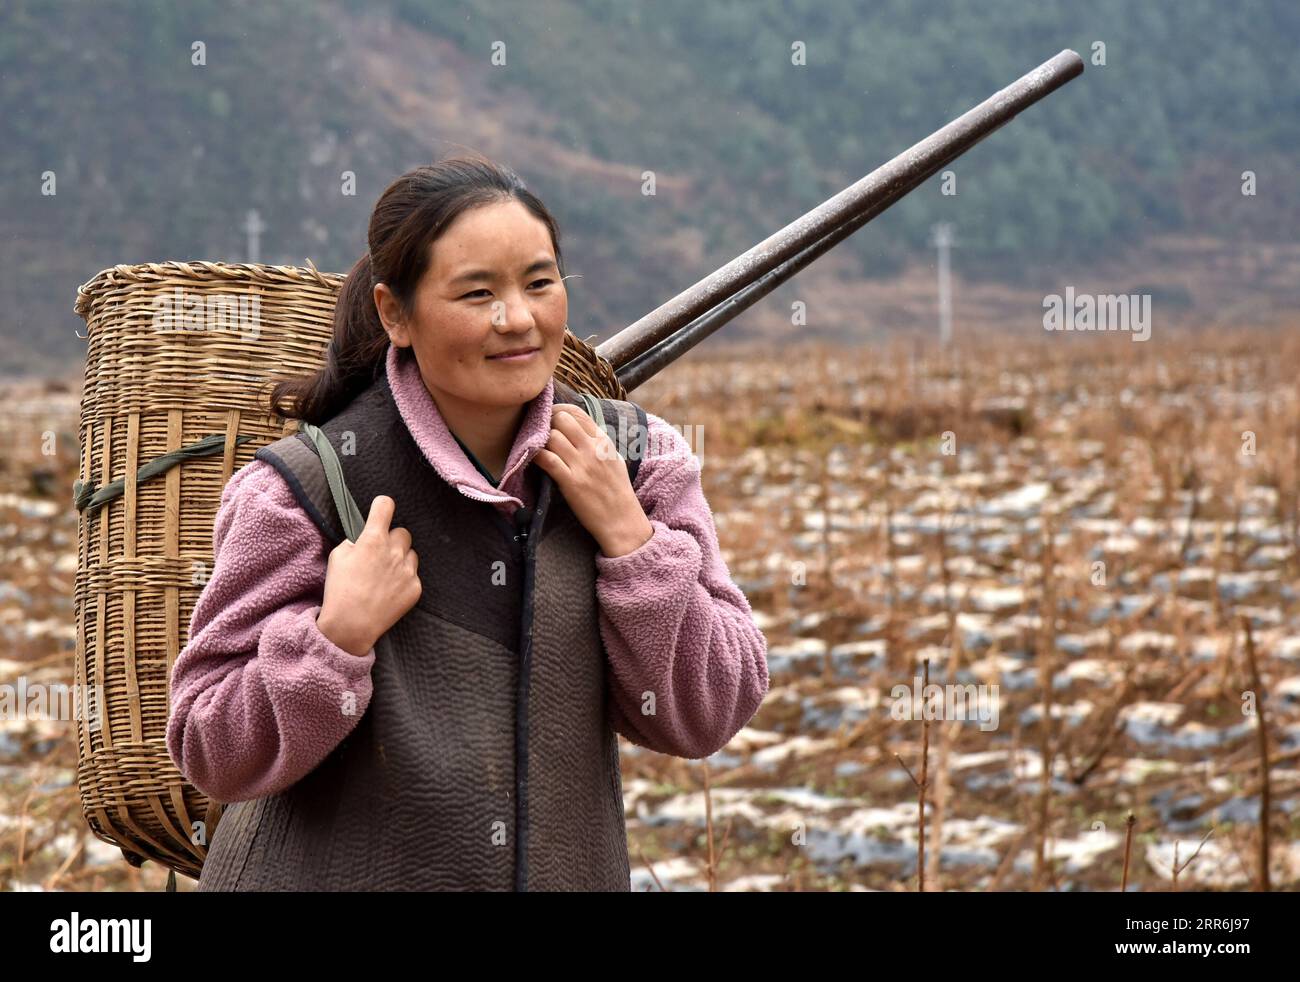 210218 -- CHENGDU, Feb. 18, 2021 -- Bamu Yubumu is on the way to the fields in Yuexi County of Liangshan Yi Autonomous Prefecture in southwest China s Sichuan Province, Feb. 17, 2021. Bamu Yubumu was known as a migrant mother in an iconic photo during a Spring Festival travel rush 11 years ago. Recently, she and her husband Wuqi Shiqie have embarked on their new career of sea cucumber cultivation in the coastal Fujian Province. During this year s Spring Festival holiday, Bamu and her husband returned to their hometown in southwest China s Sichuan for a visit. Amid slack season of agricultural Stock Photo